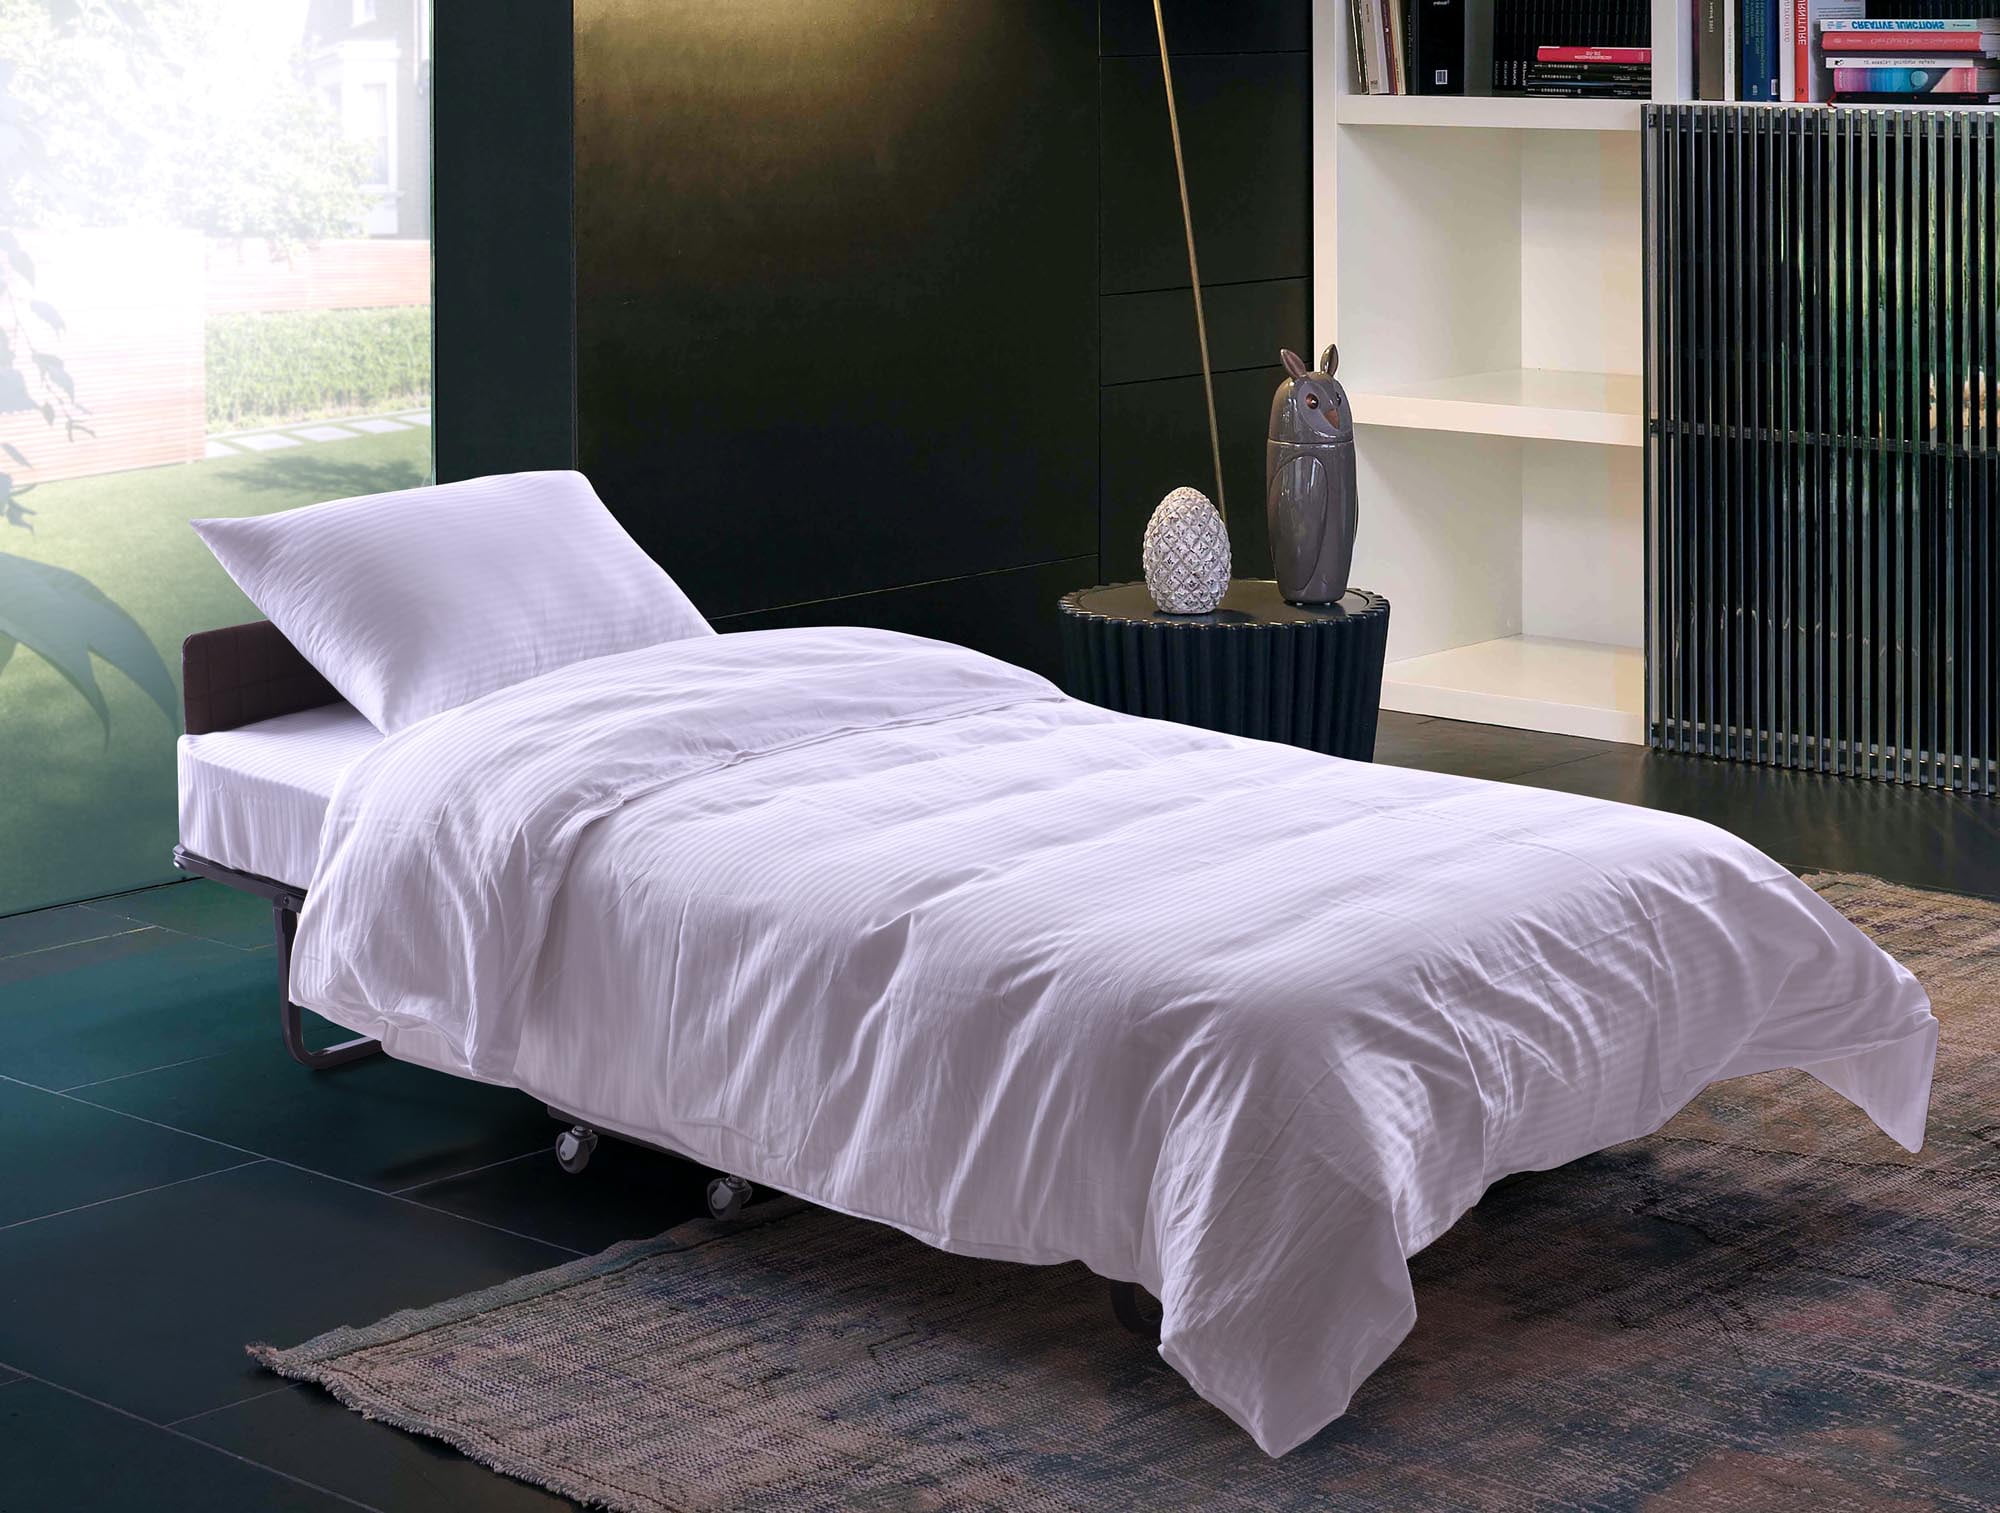 rollaway bed with mattress